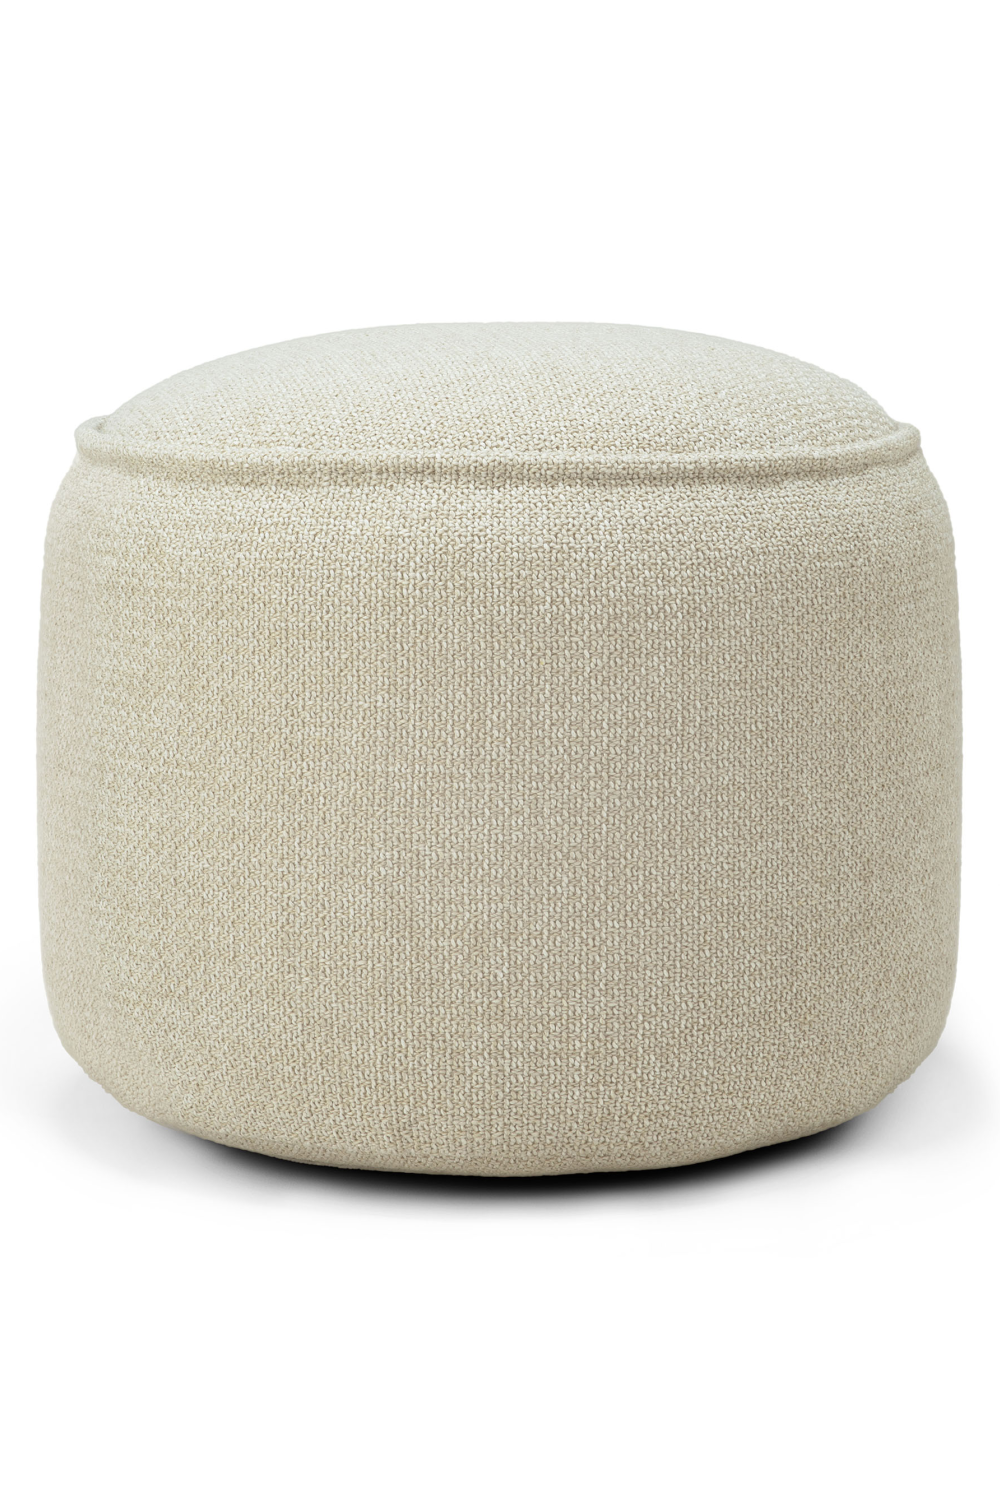 Image of Round Outdoor Pouf | Ethnicraft Donut